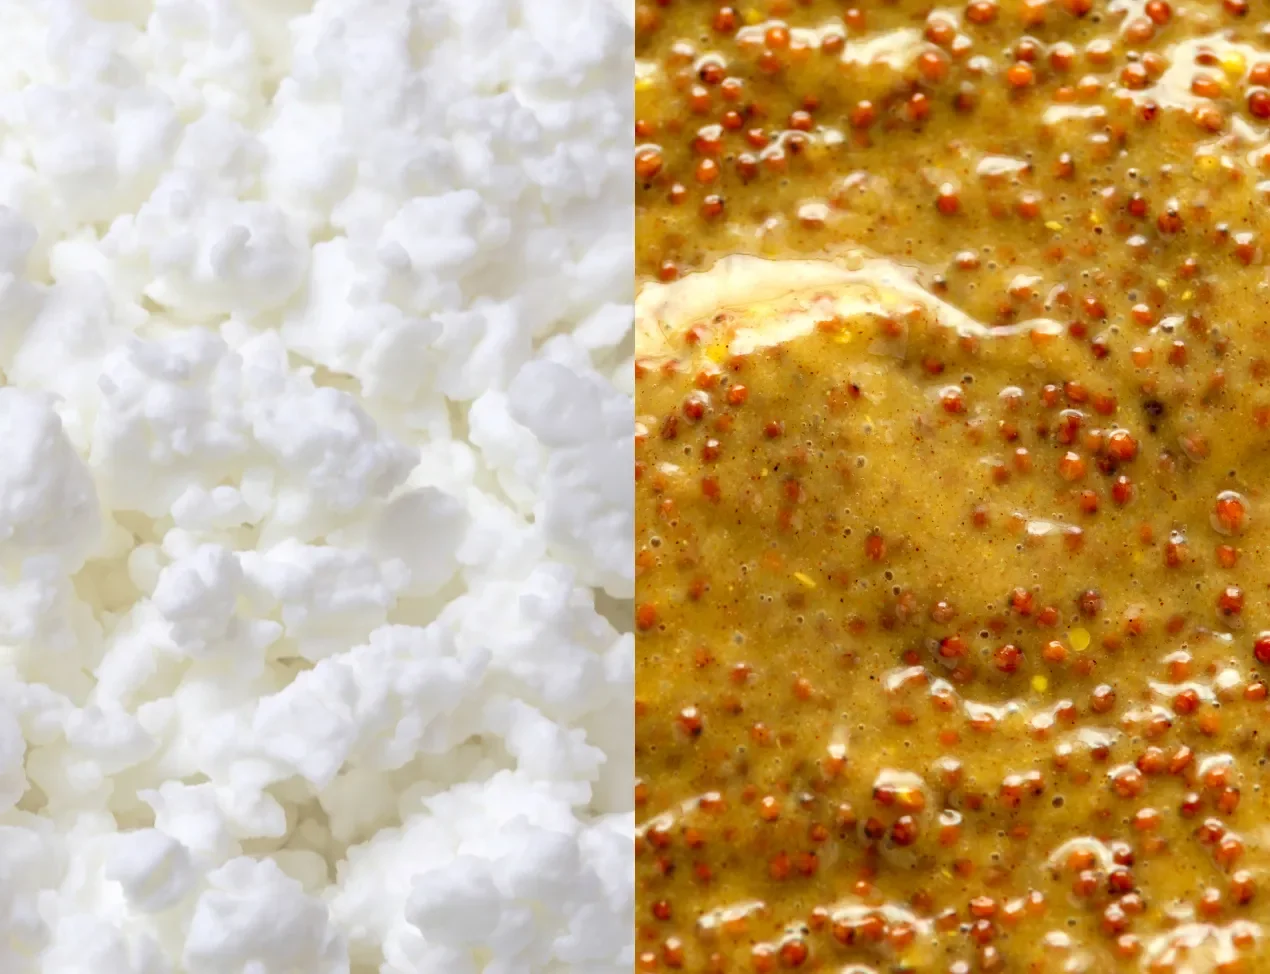  Is the cottage cheese and mustard diet good for you?